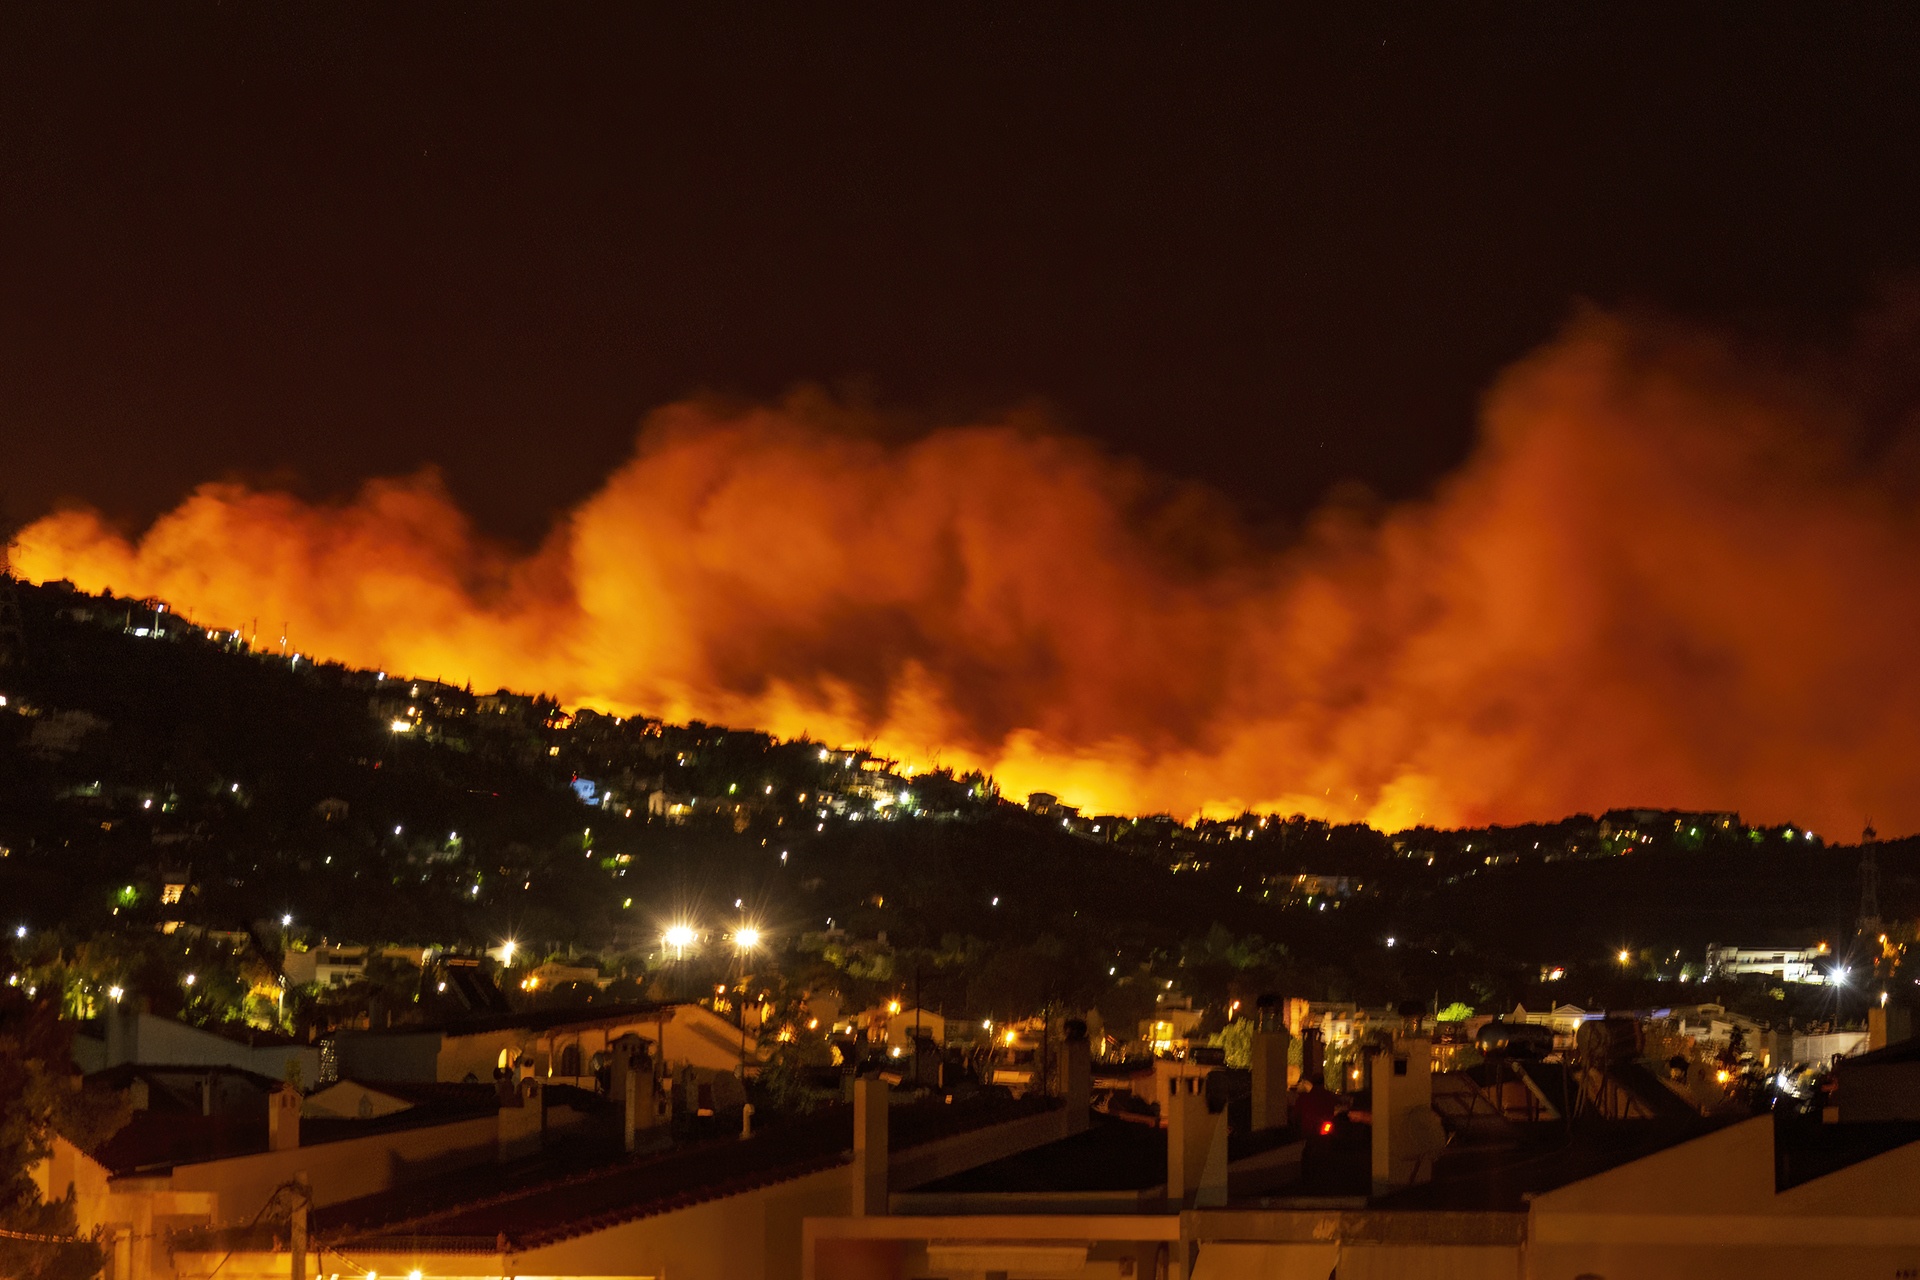 Fires have been ravaging parts of Greece for the past week.